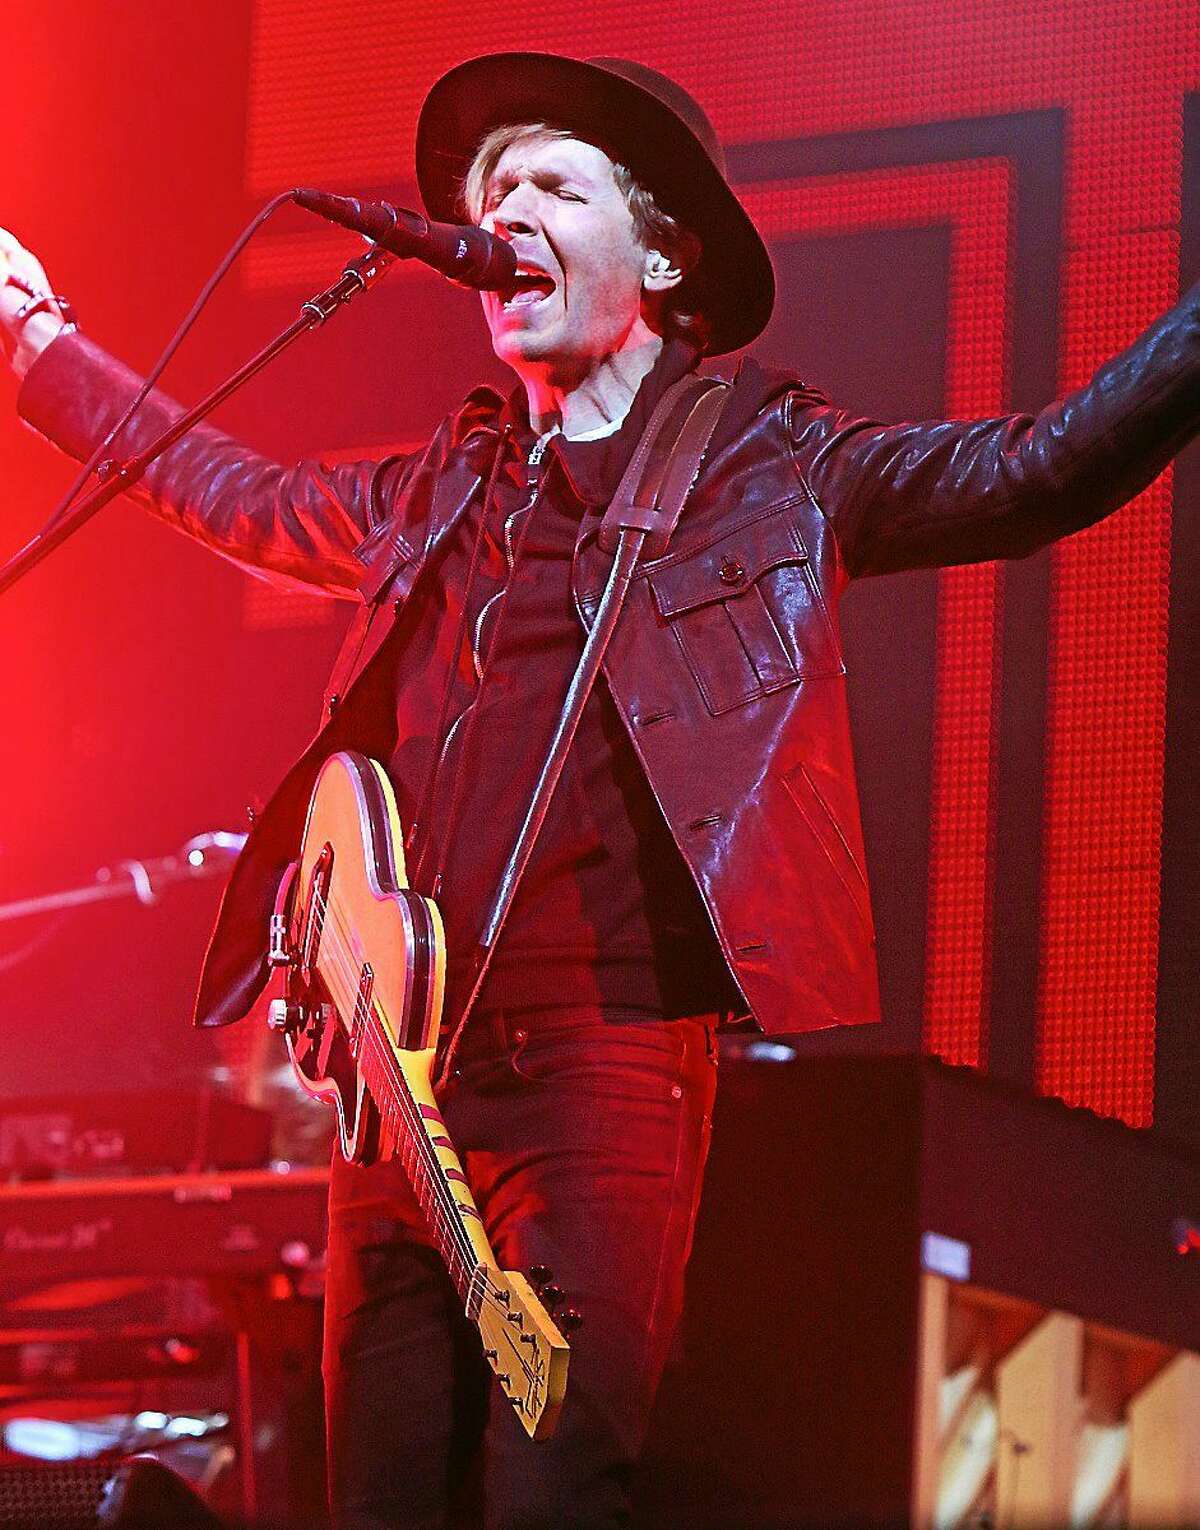 Photo by John Atashian Singer, songwriter, producer, and multi-instrumentalist Beck Hansen, better known by the stage name Beck, is shown rocking the crowd of fans, attendance , Boston Calling Music Festival on Friday night May 22. Beck is currently on tour, support of his brand new Grammy Award winning CD ìMorning Phaseî which won awards, three categories: Best Engineered Album, NonóClassical; Best Rock Album; and Album of the Year. Boston Calling will be held again, September, for more information on this outdoor music festival you can visit www.bostoncalling.com.